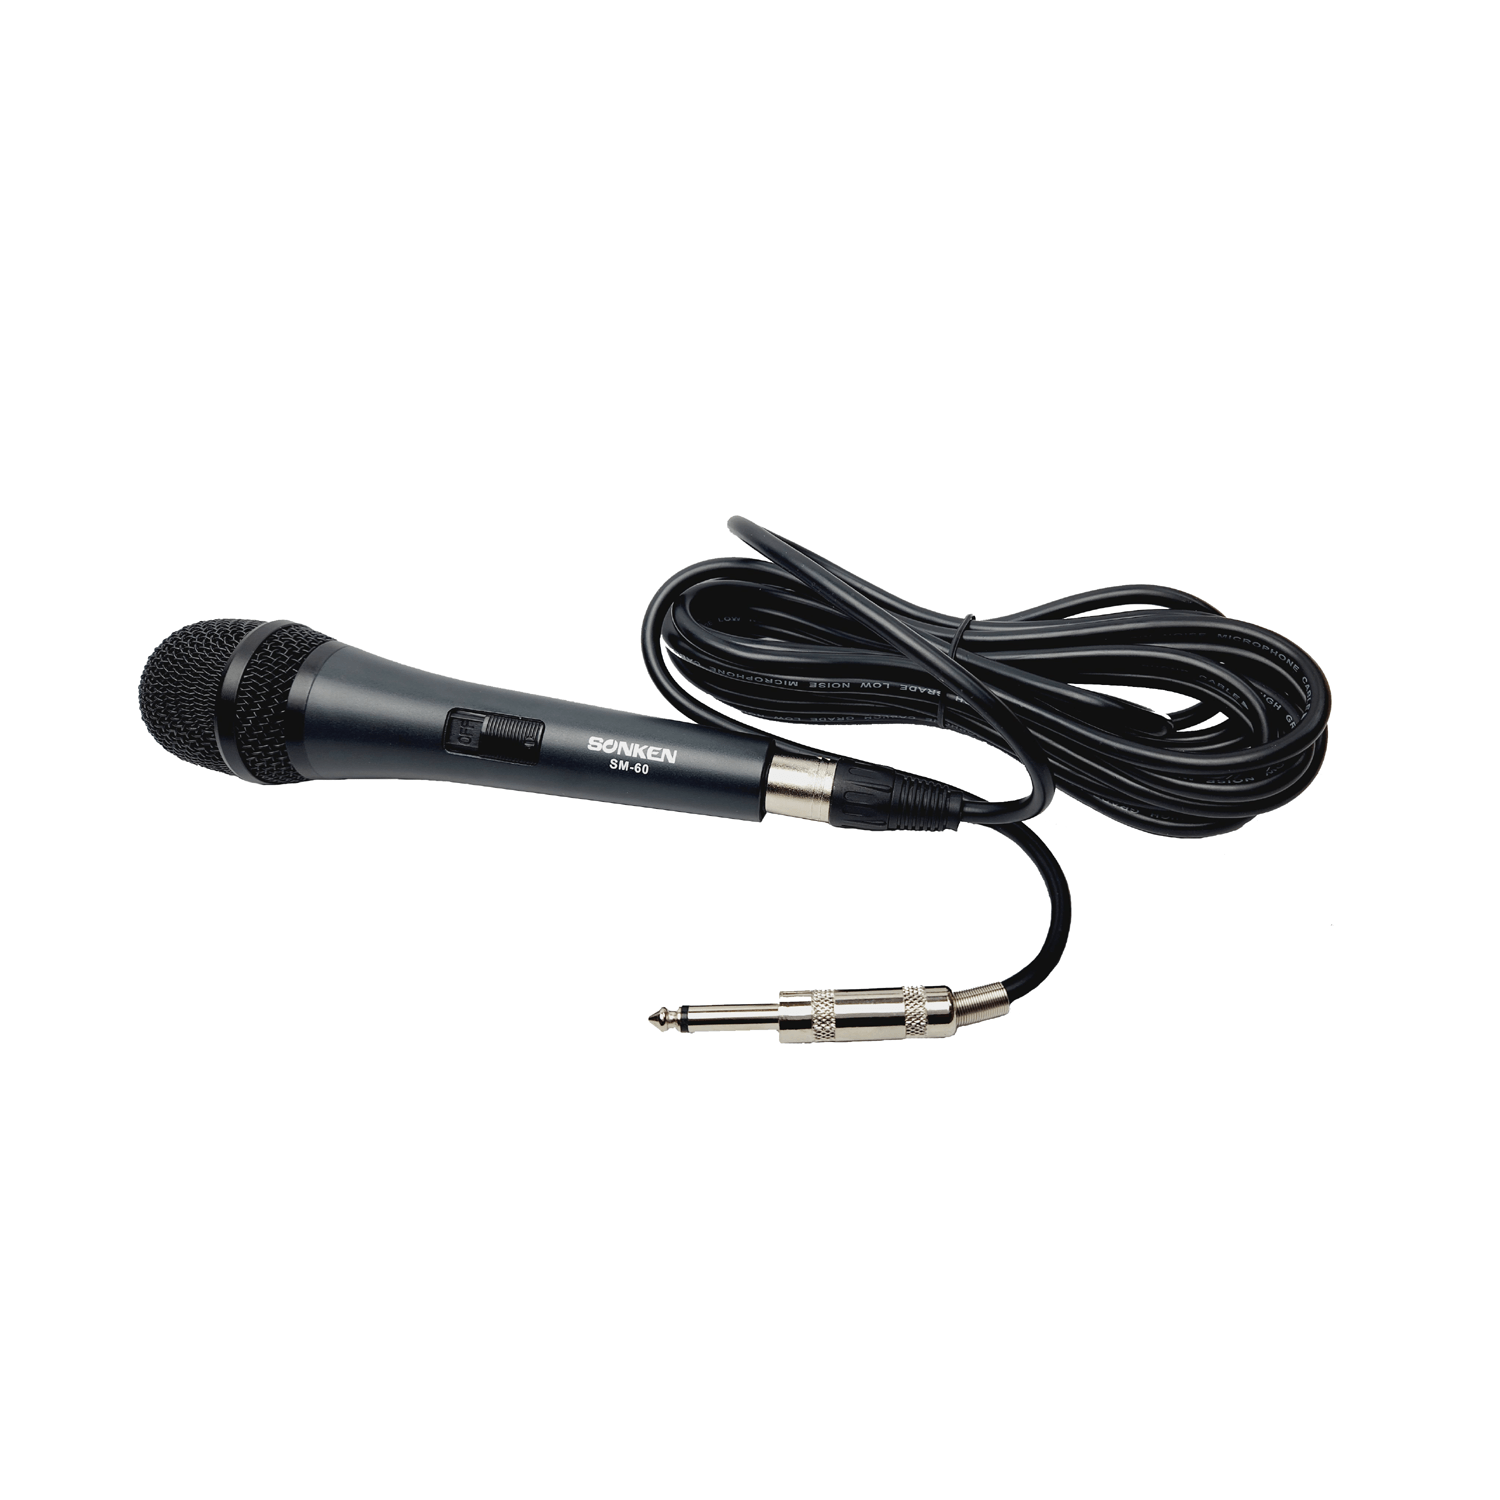 1x Sonken Professonal Wired Microphone with 5m Cable (6.35mm Jack) - Karaoke Home Entertainment